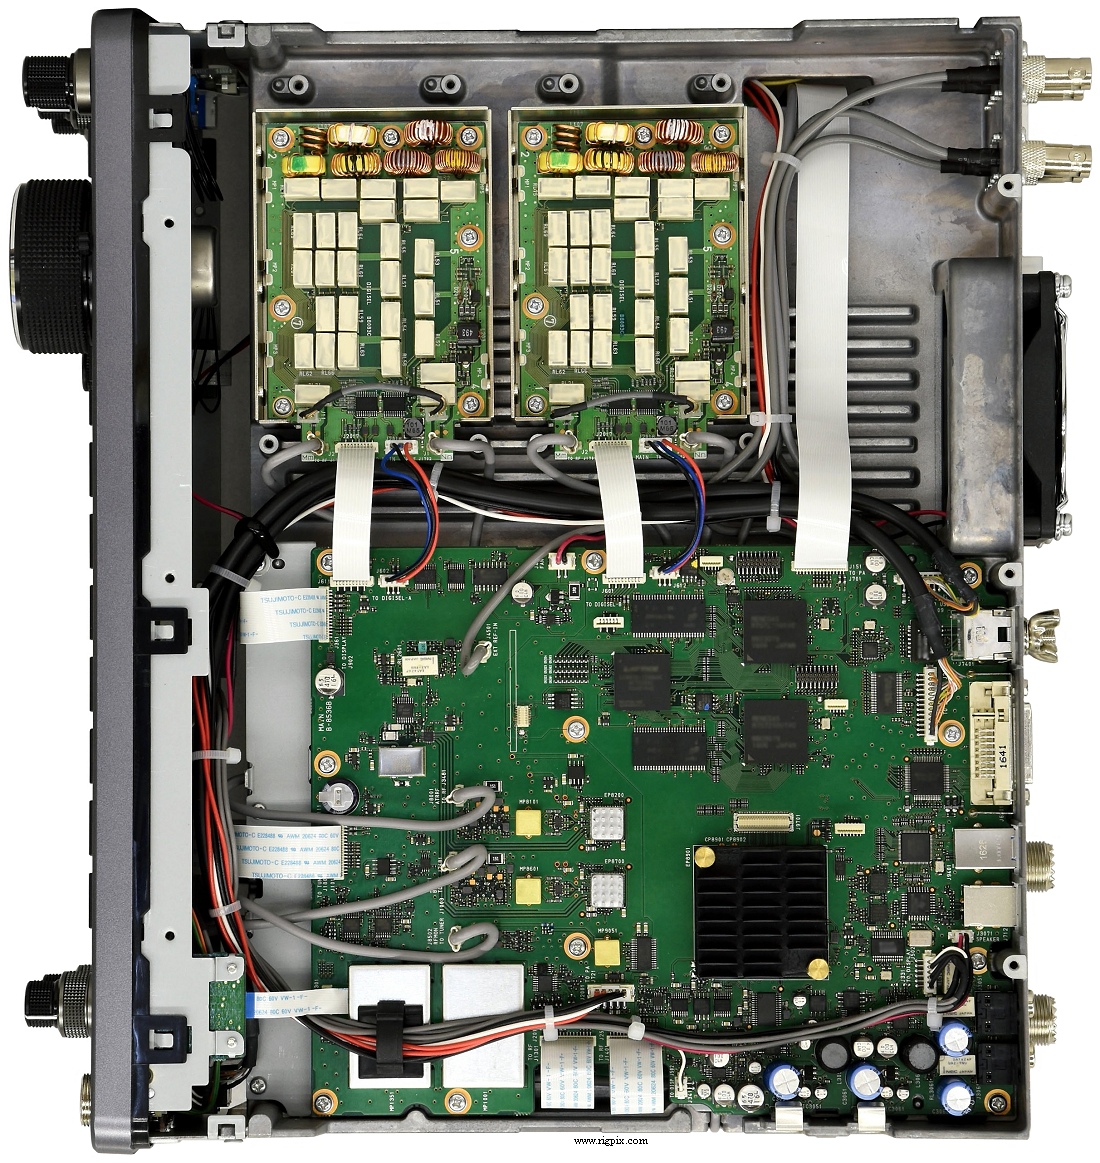 An inside bottomview picture of Icom IC-7610